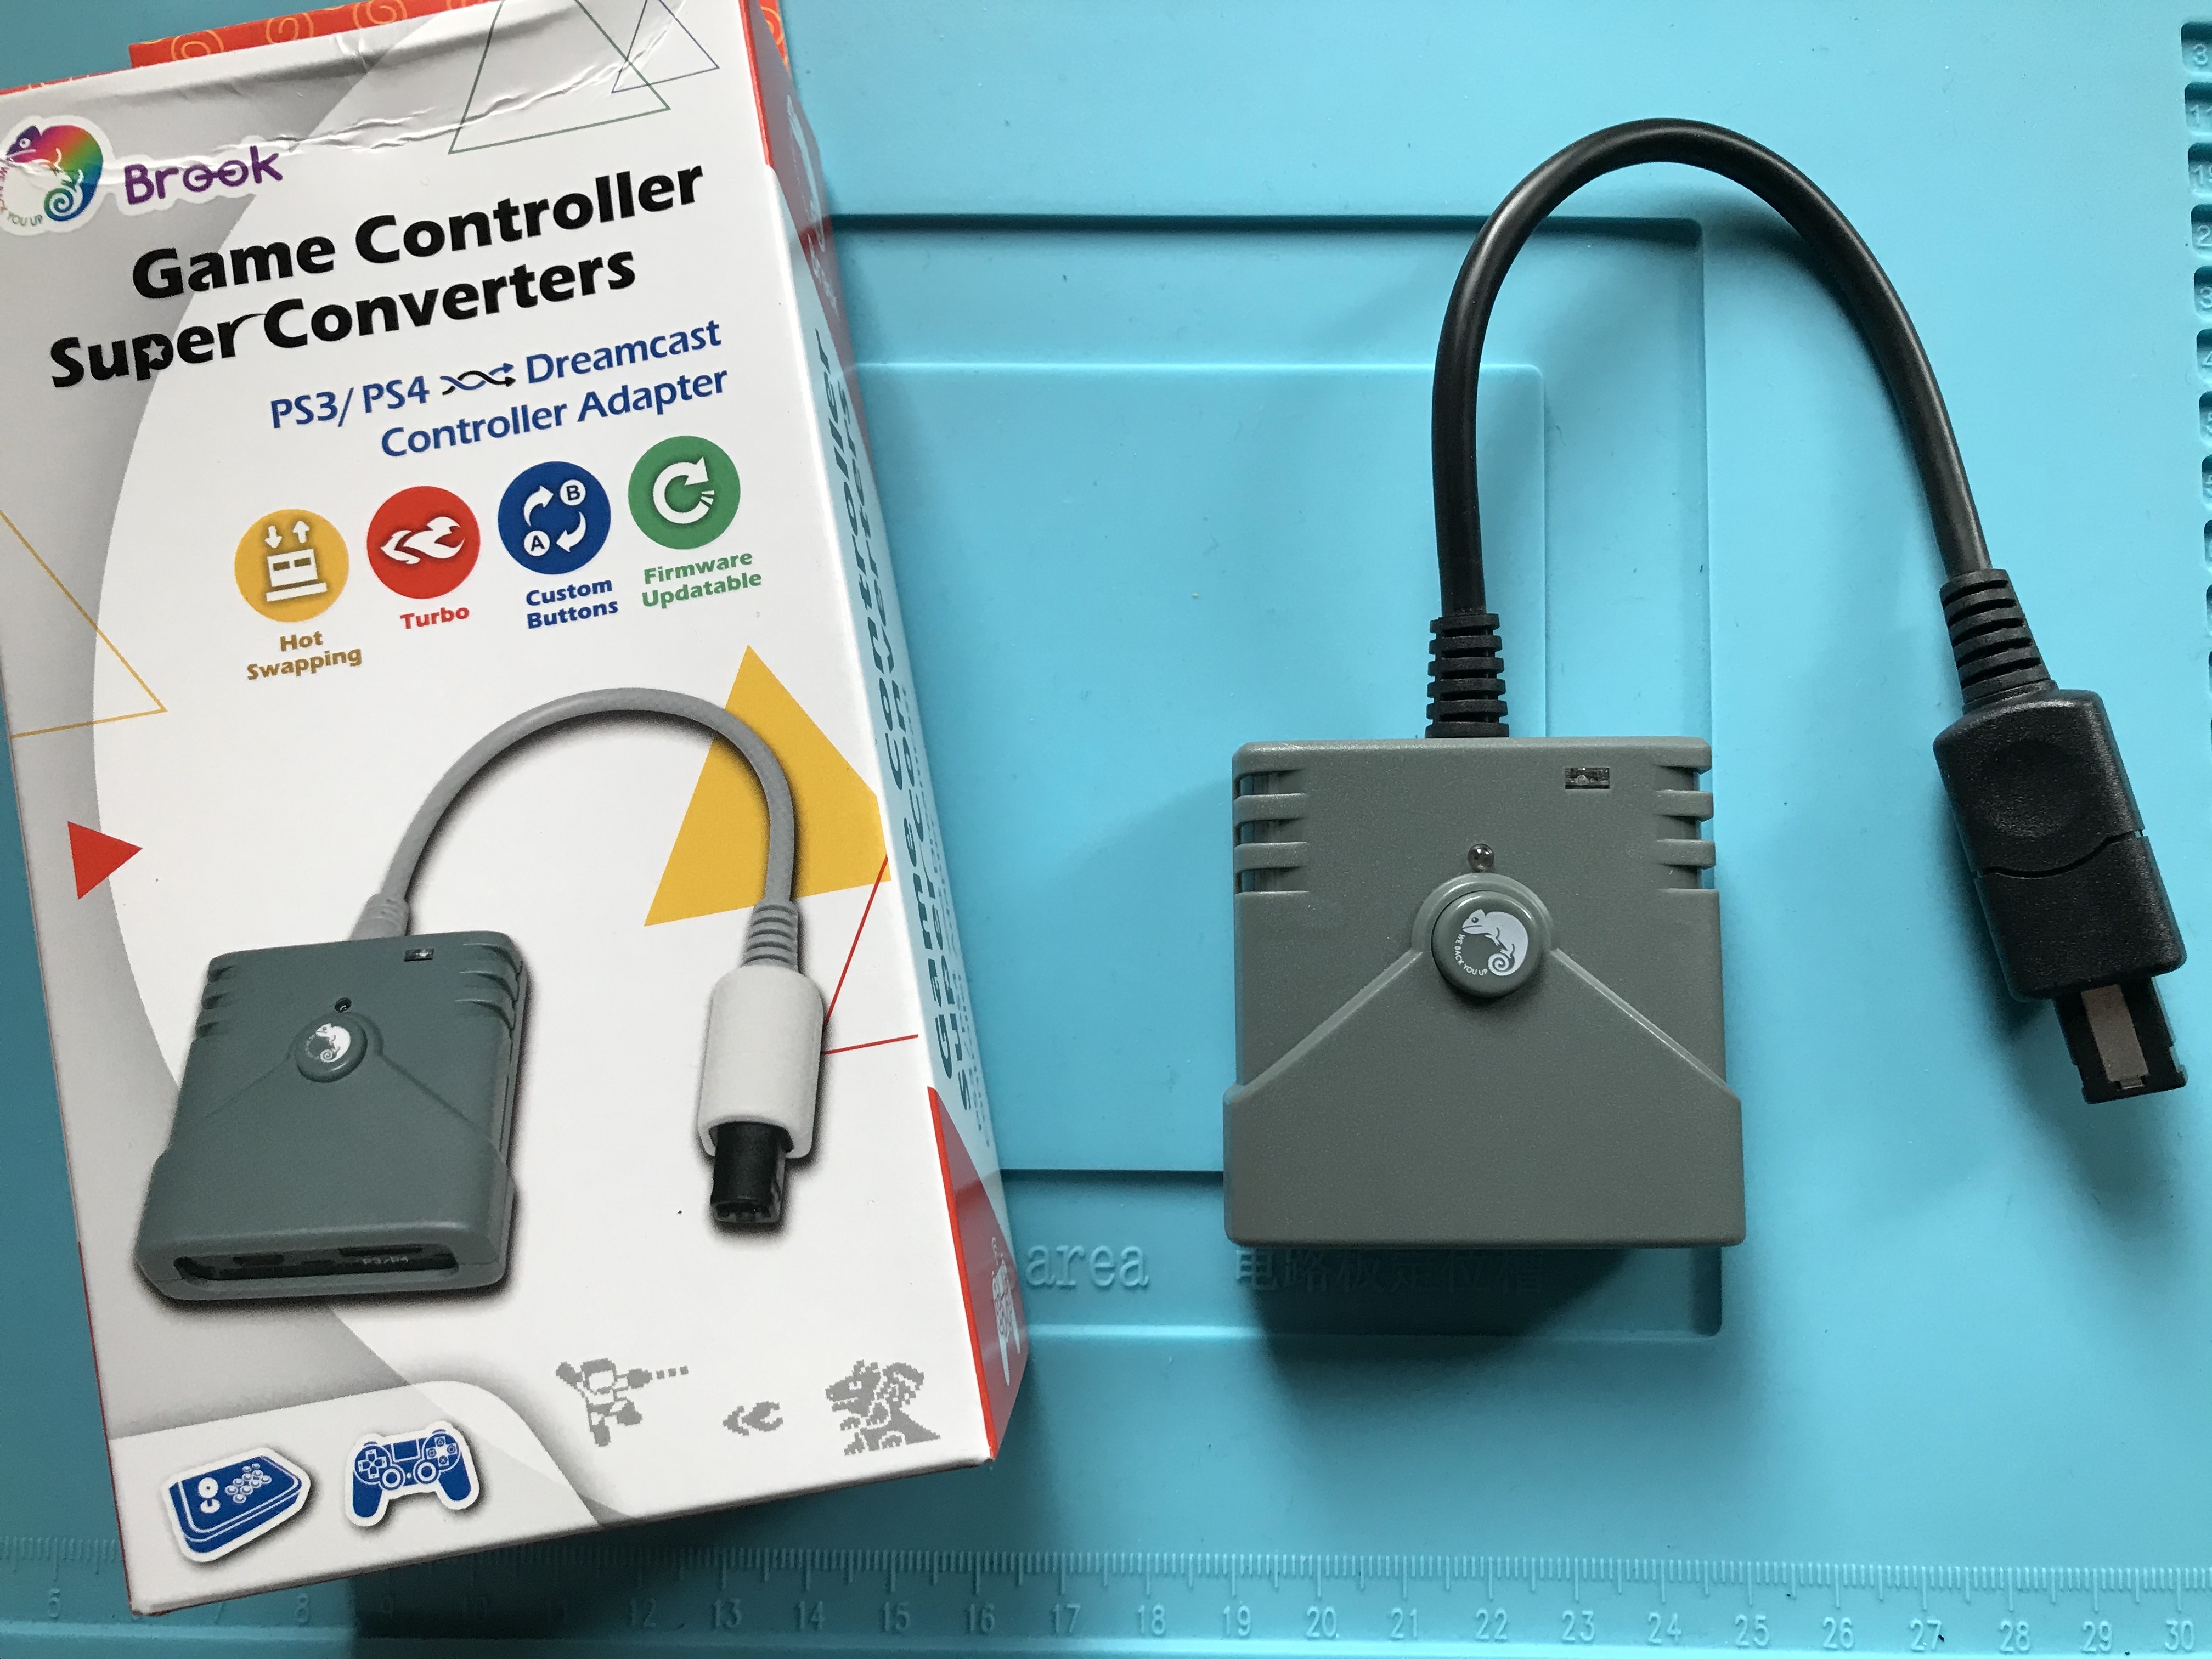 The Brook converter allows a PlayStation 3 or 4 controller to work wirelessly with Dreamcast